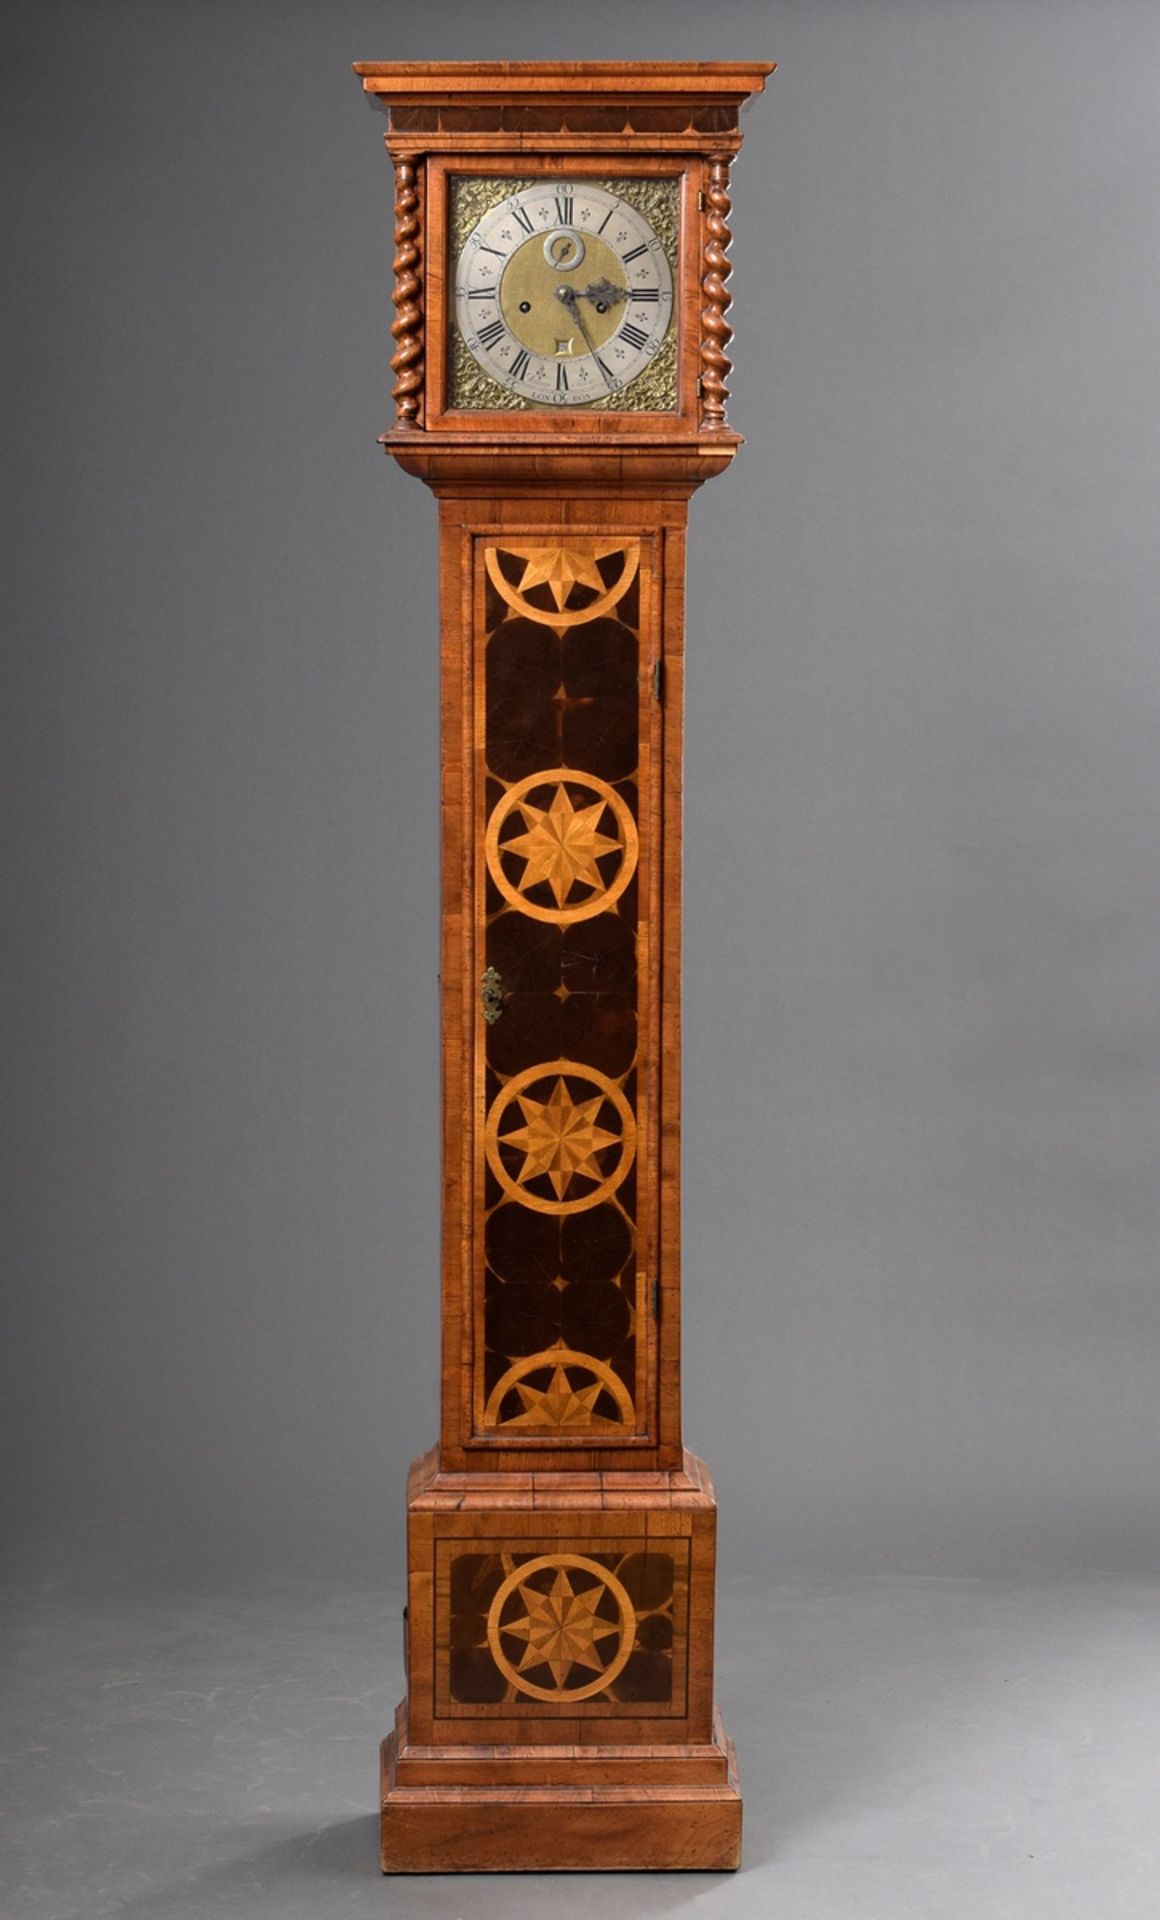 English Grandmother's Clock in veneered wooden case with turned columns on the sides, star inlays a - Image 2 of 11